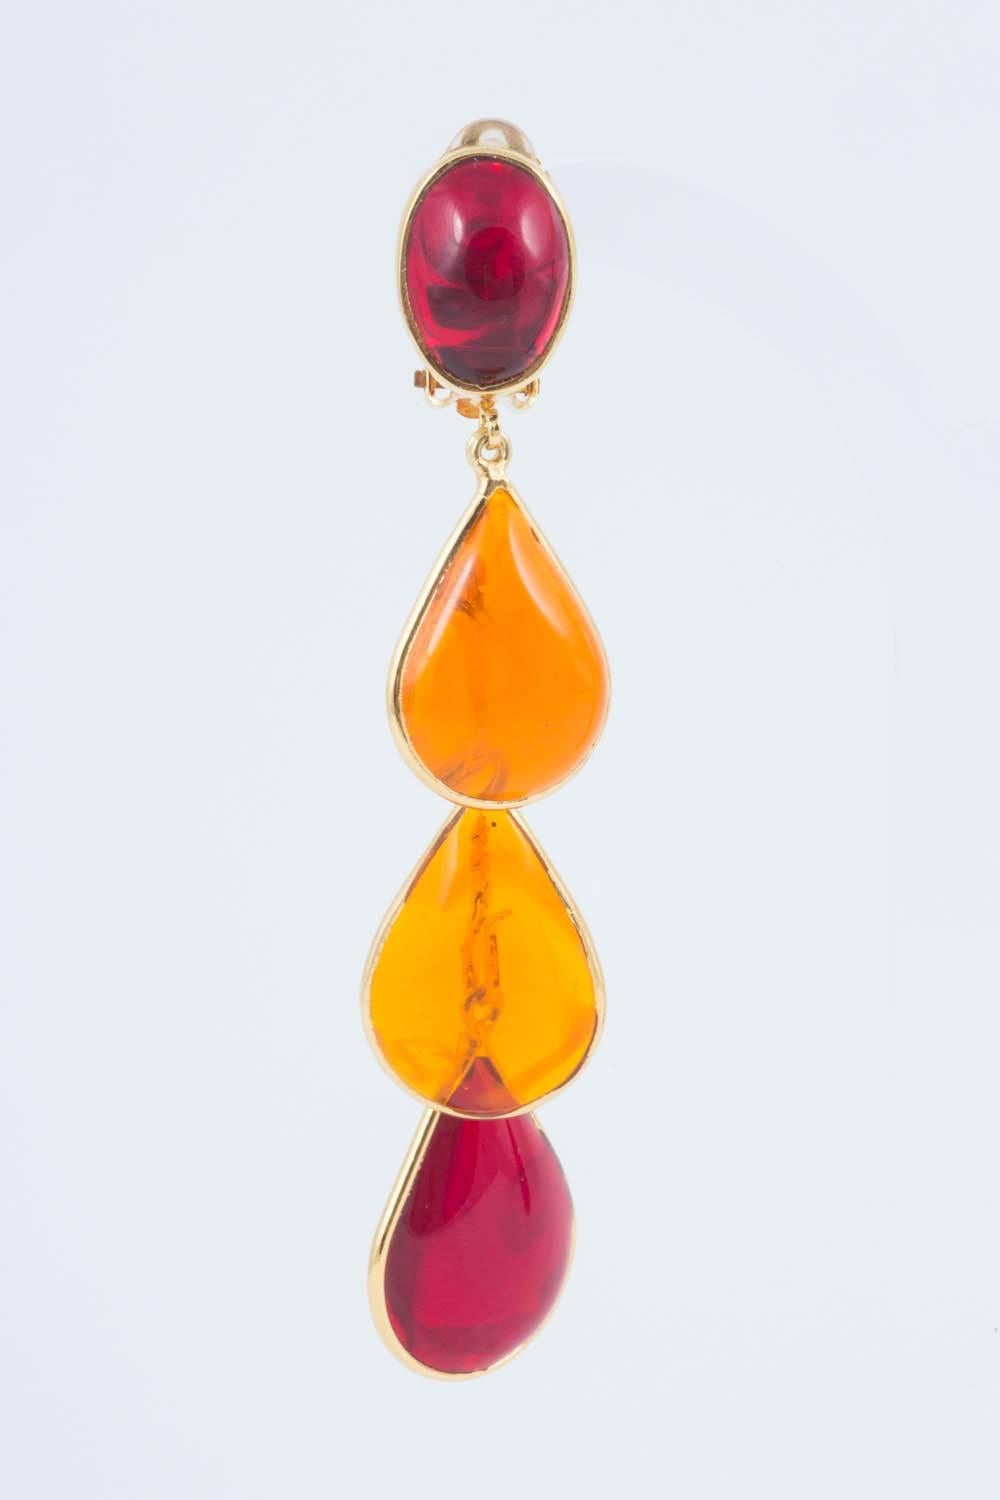 A great colour combination of clear orange and red poured glass, bright and eye catching. The earrings are articulated and it is possible to 'unhook' one segment to make the earring shorter, should one decide so. Simple and pleasing, these are